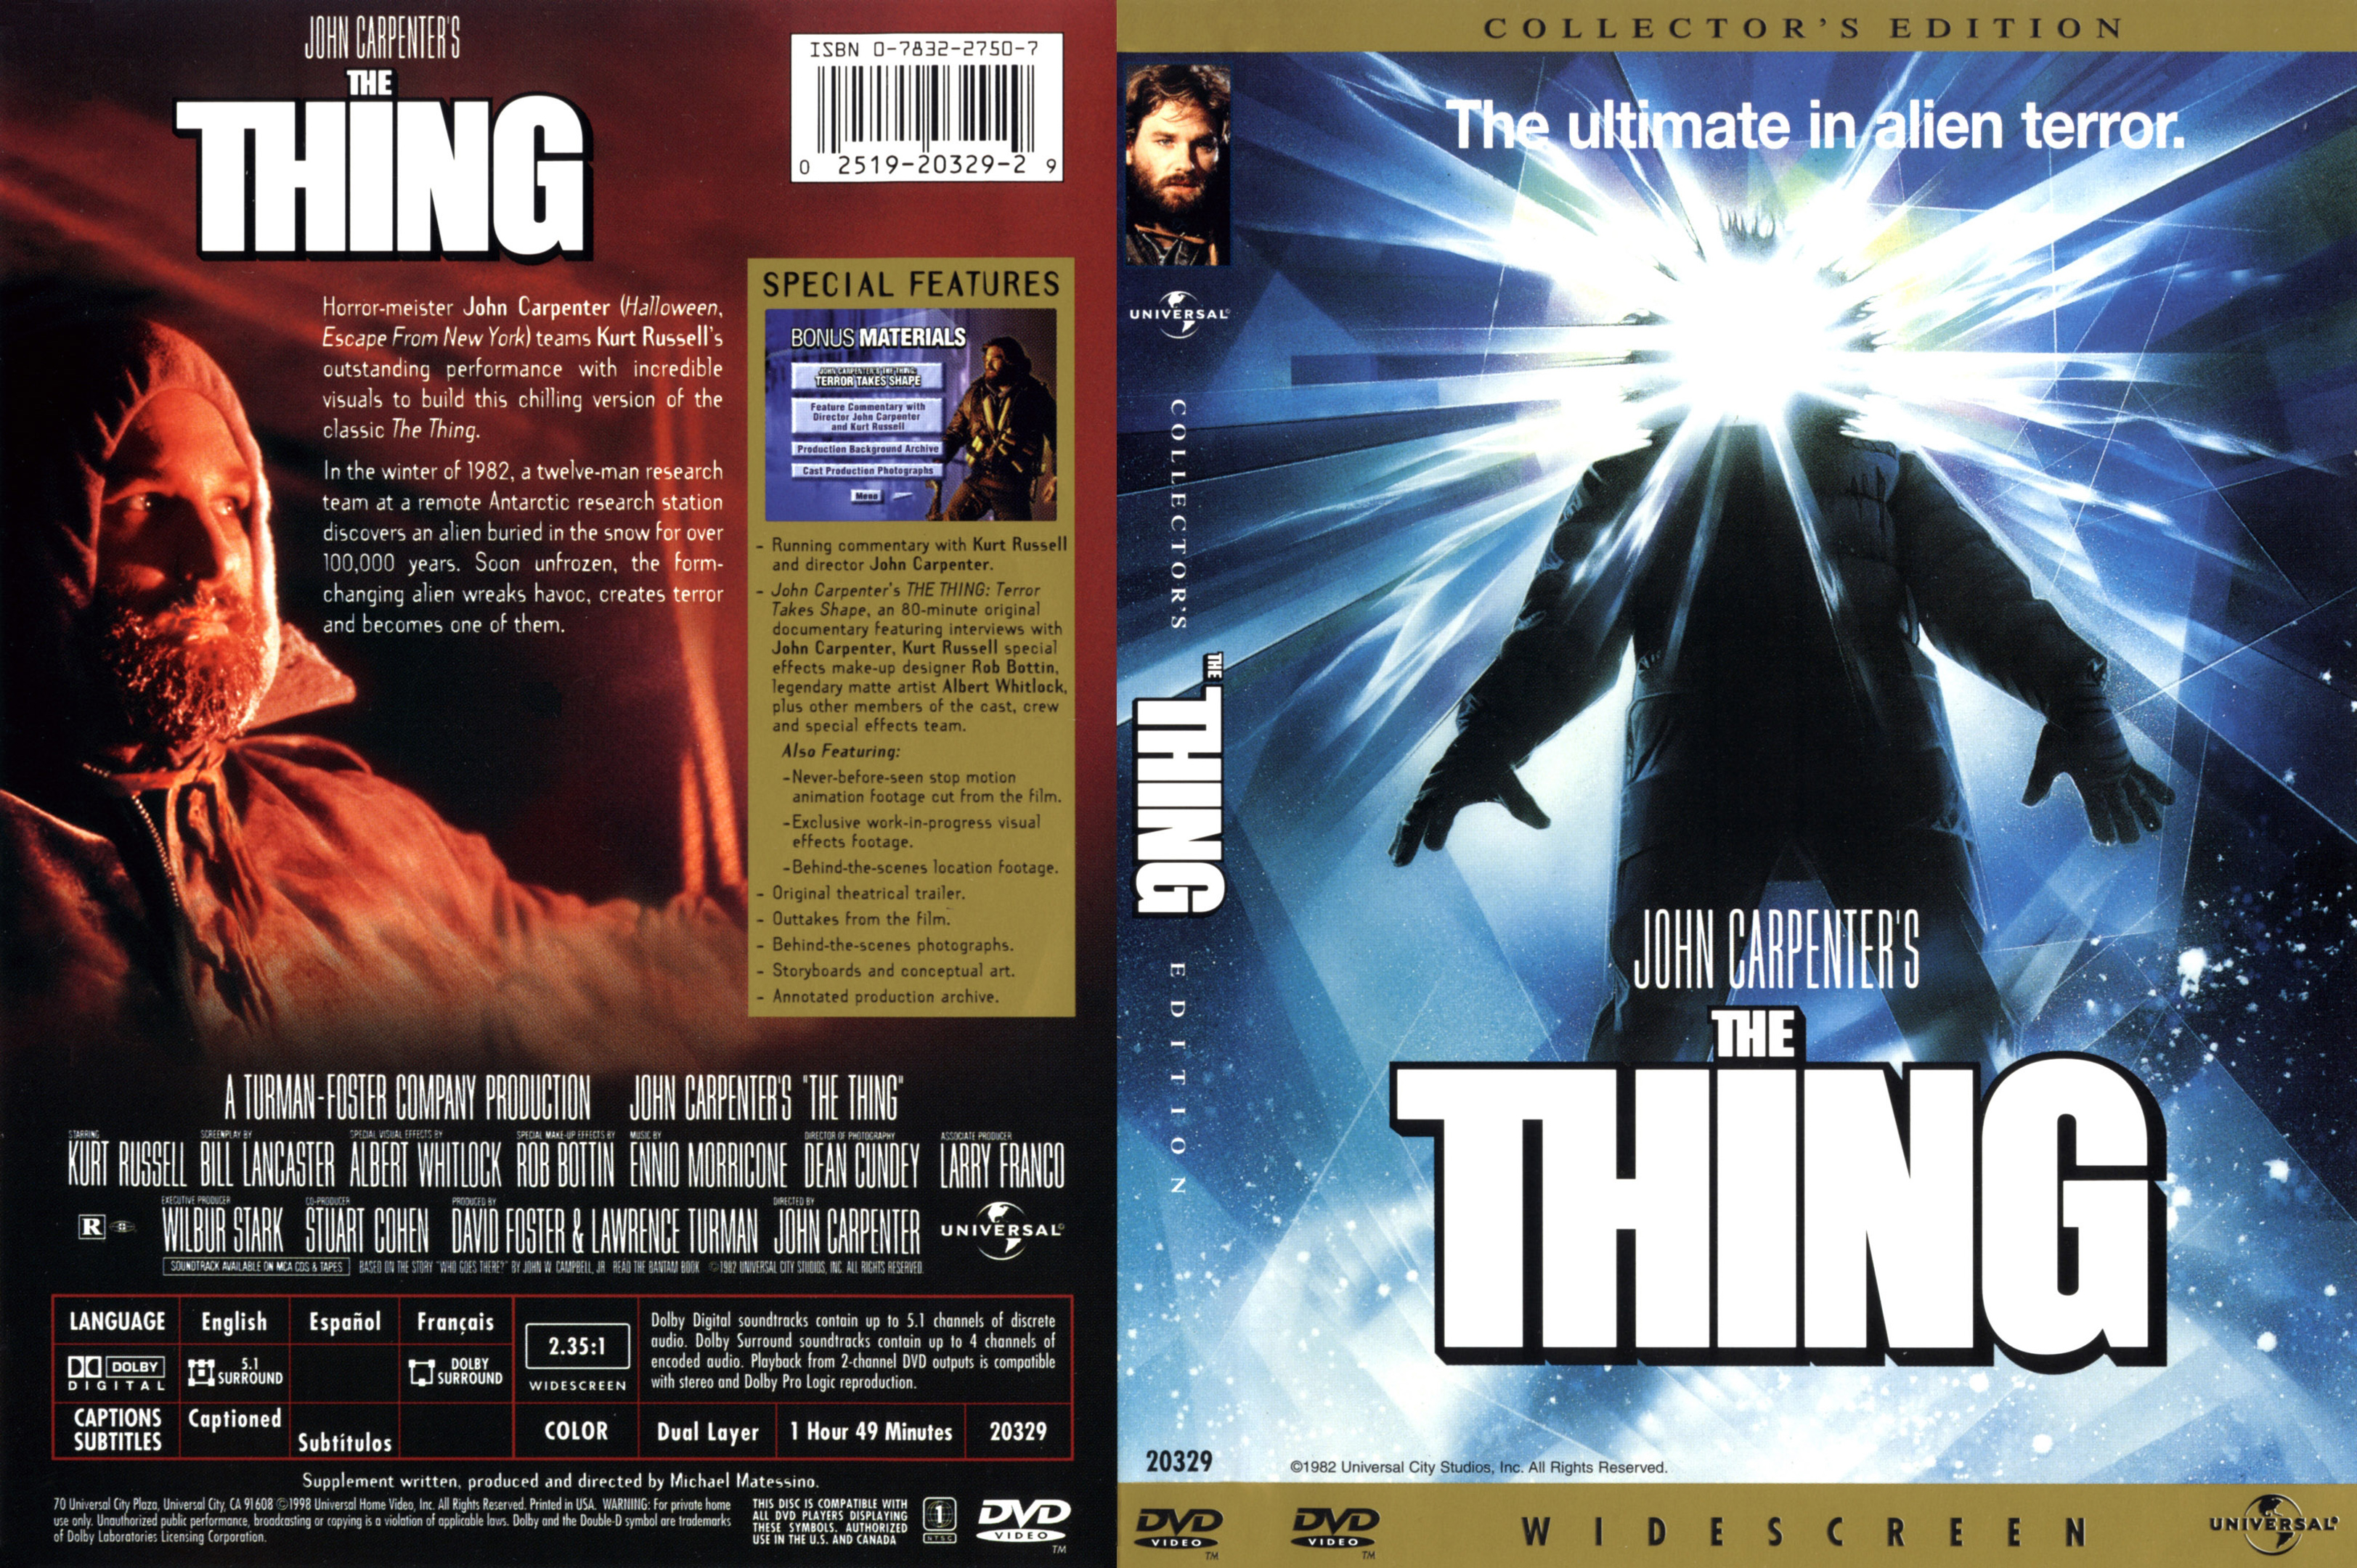 The 1 thing book. Нечто DVD.